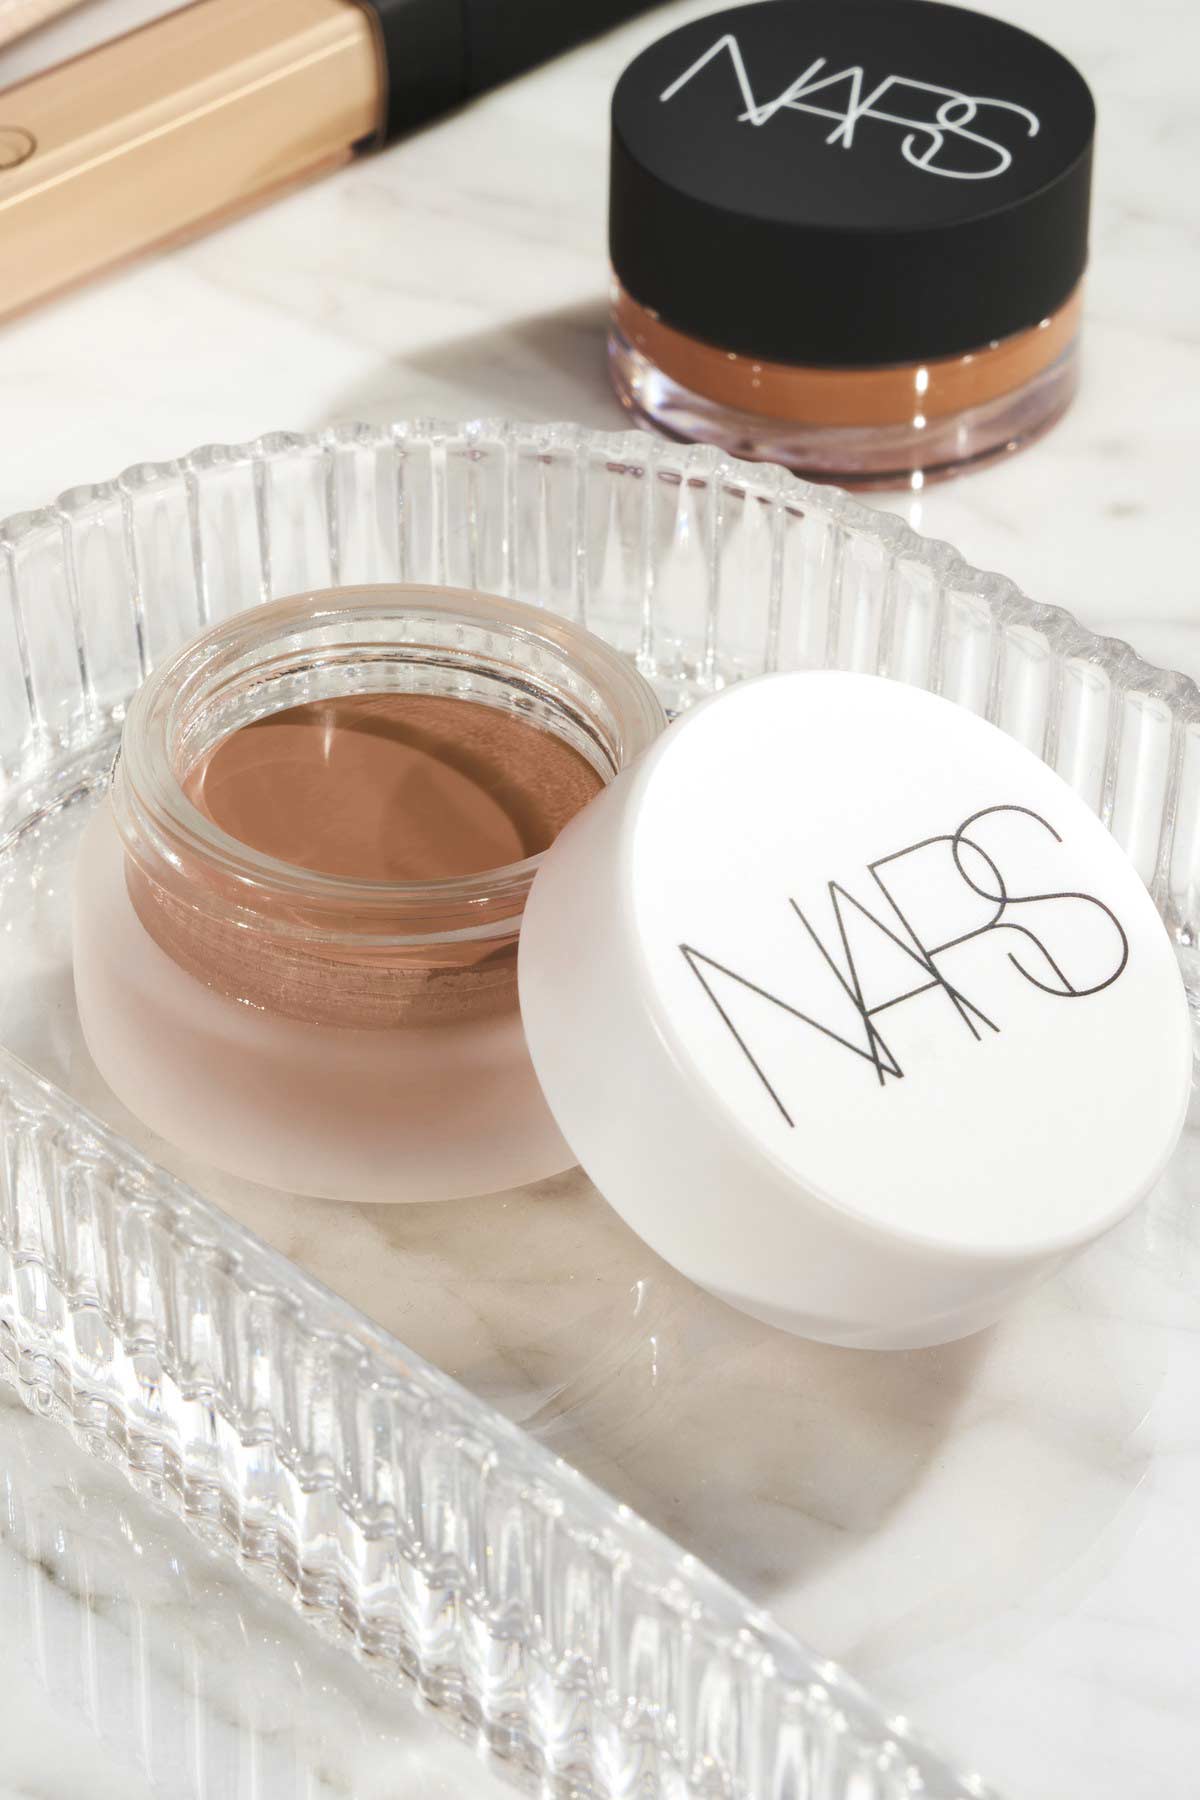 How The New Eye Brightener Compares To Other NARS Concealers